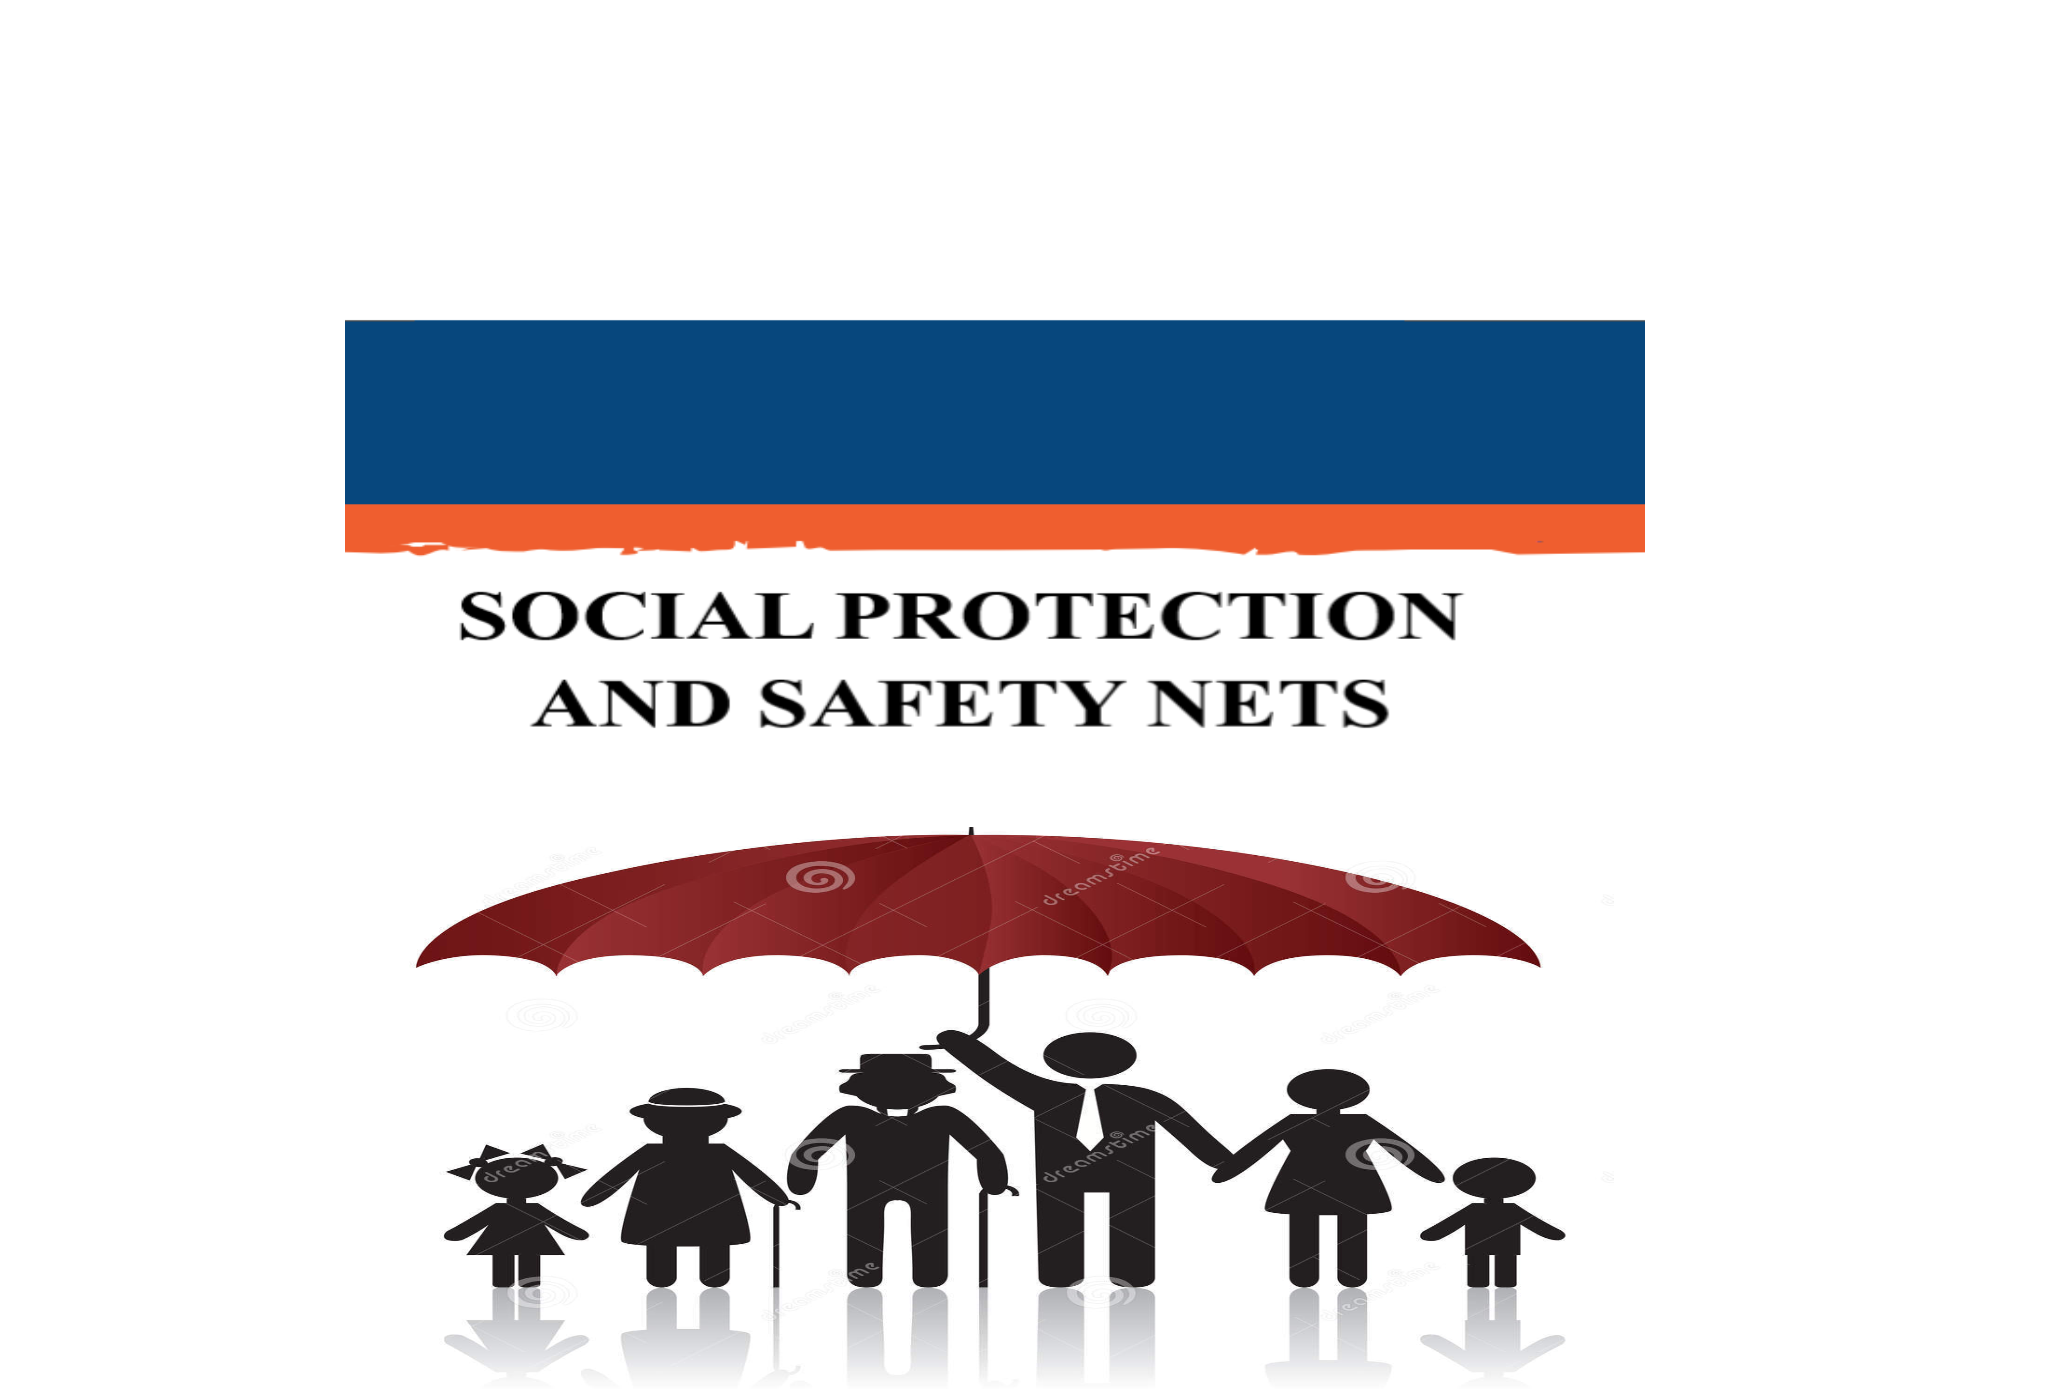 TRAINING COURSE ON SOCIAL PROTECTION AND SAFETY NETS, Dubai, United Arab Emirates